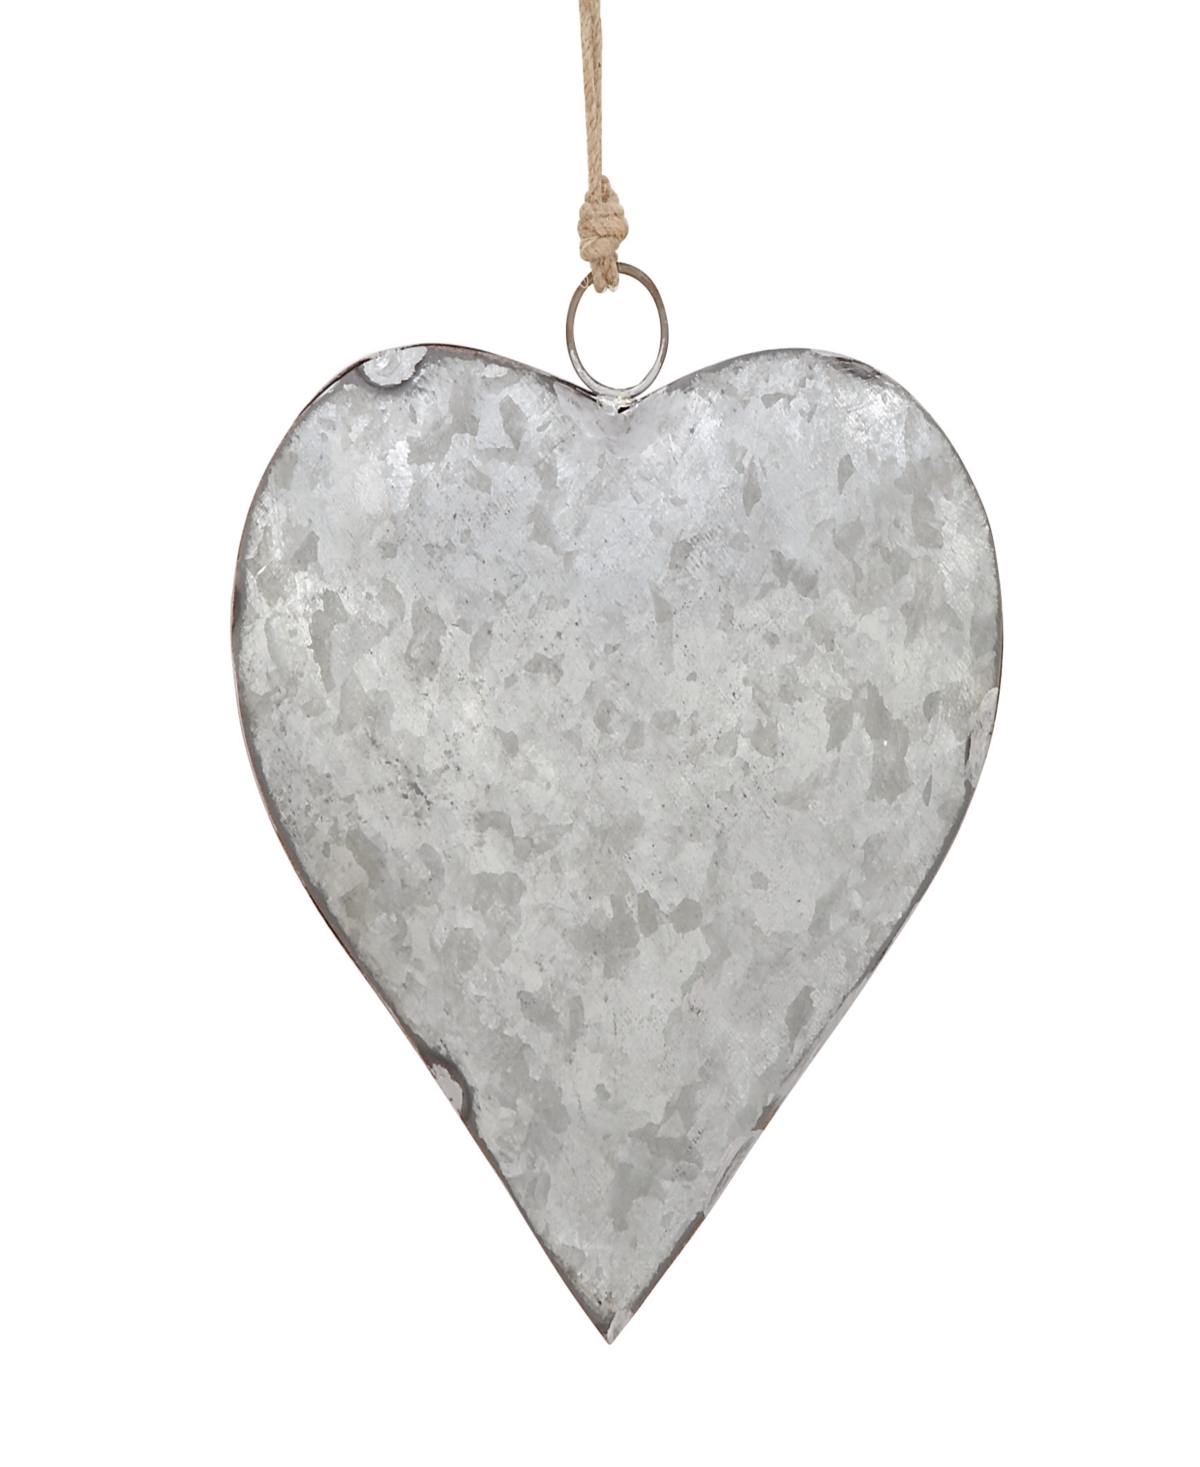 Rosemary Lane Metal Heart Tibetan Inspired Decorative Bell With Hanging Rope, Set Of 3 12", 17", 21"h In Gray